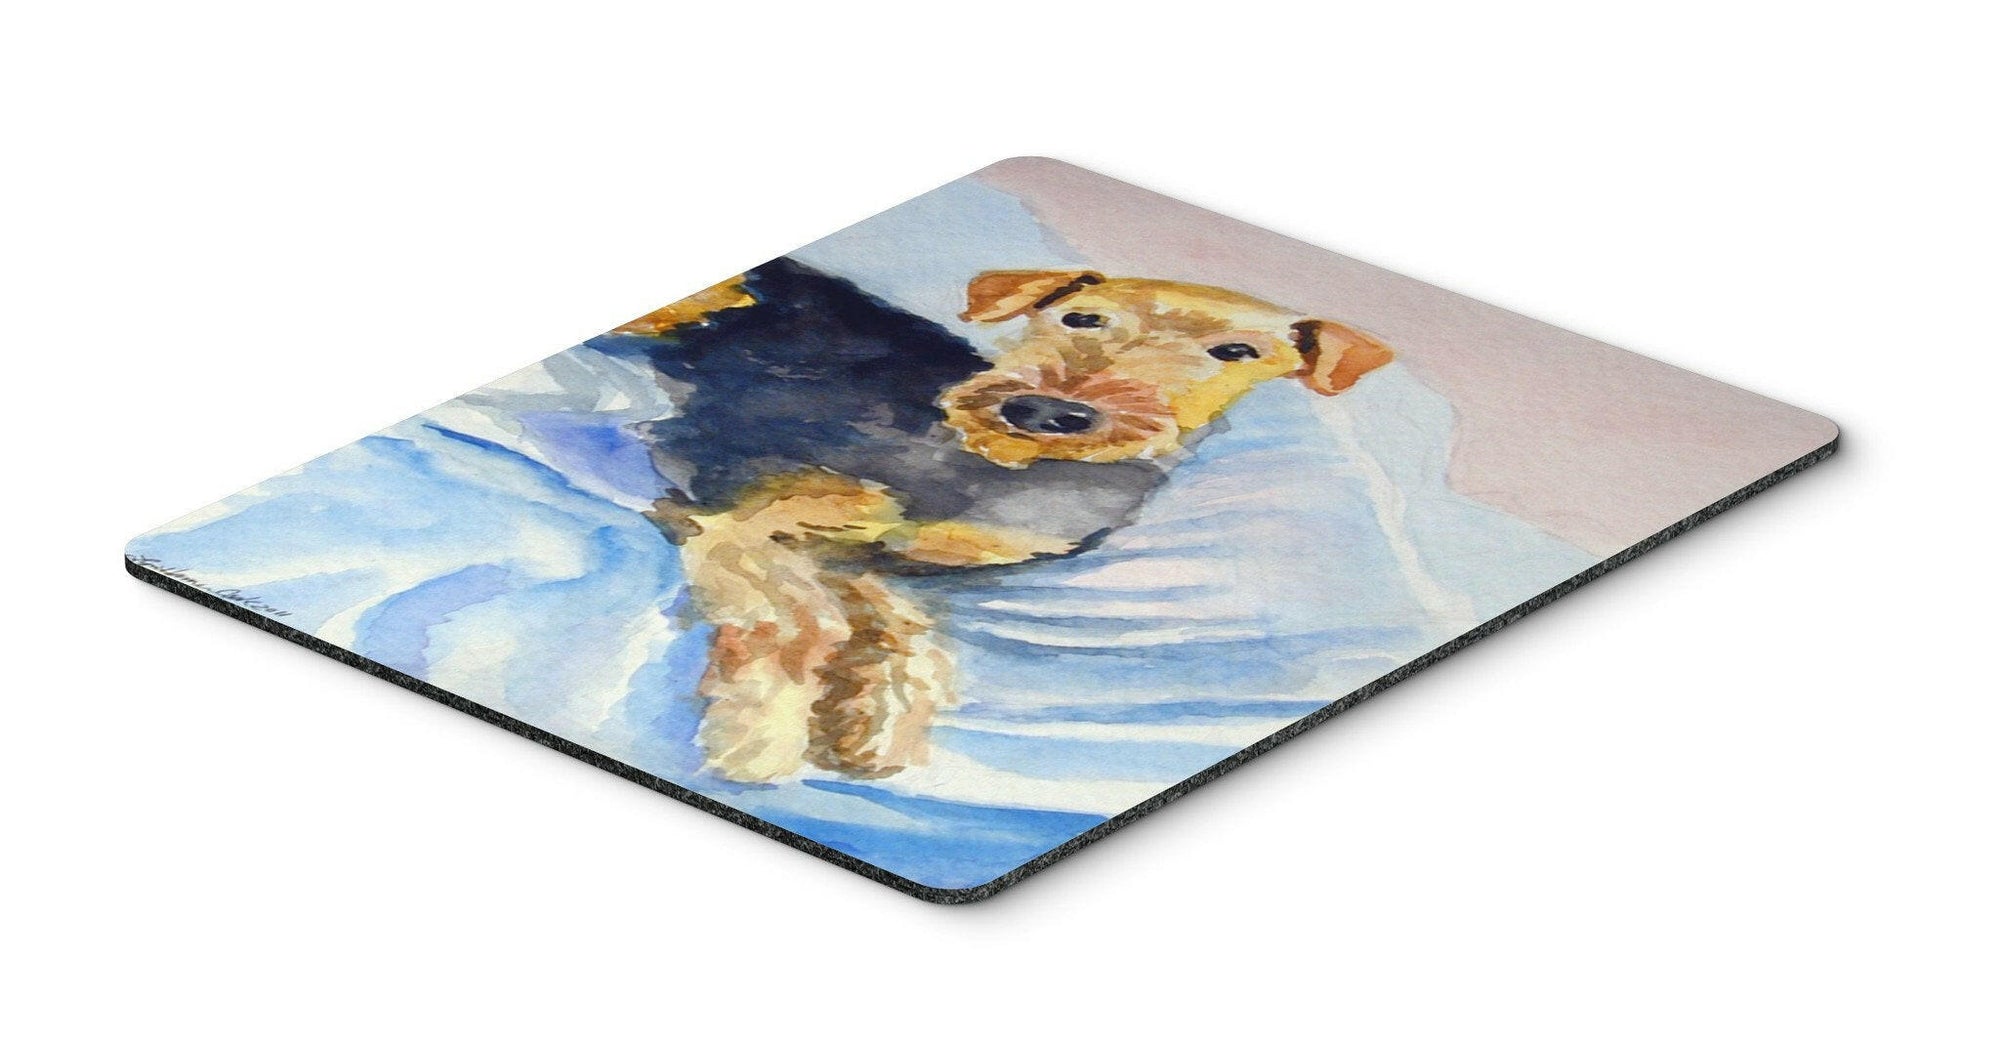 Cozy Airedale Terrier Mouse Pad, Hot Pad or Trivet 7335MP by Caroline's Treasures